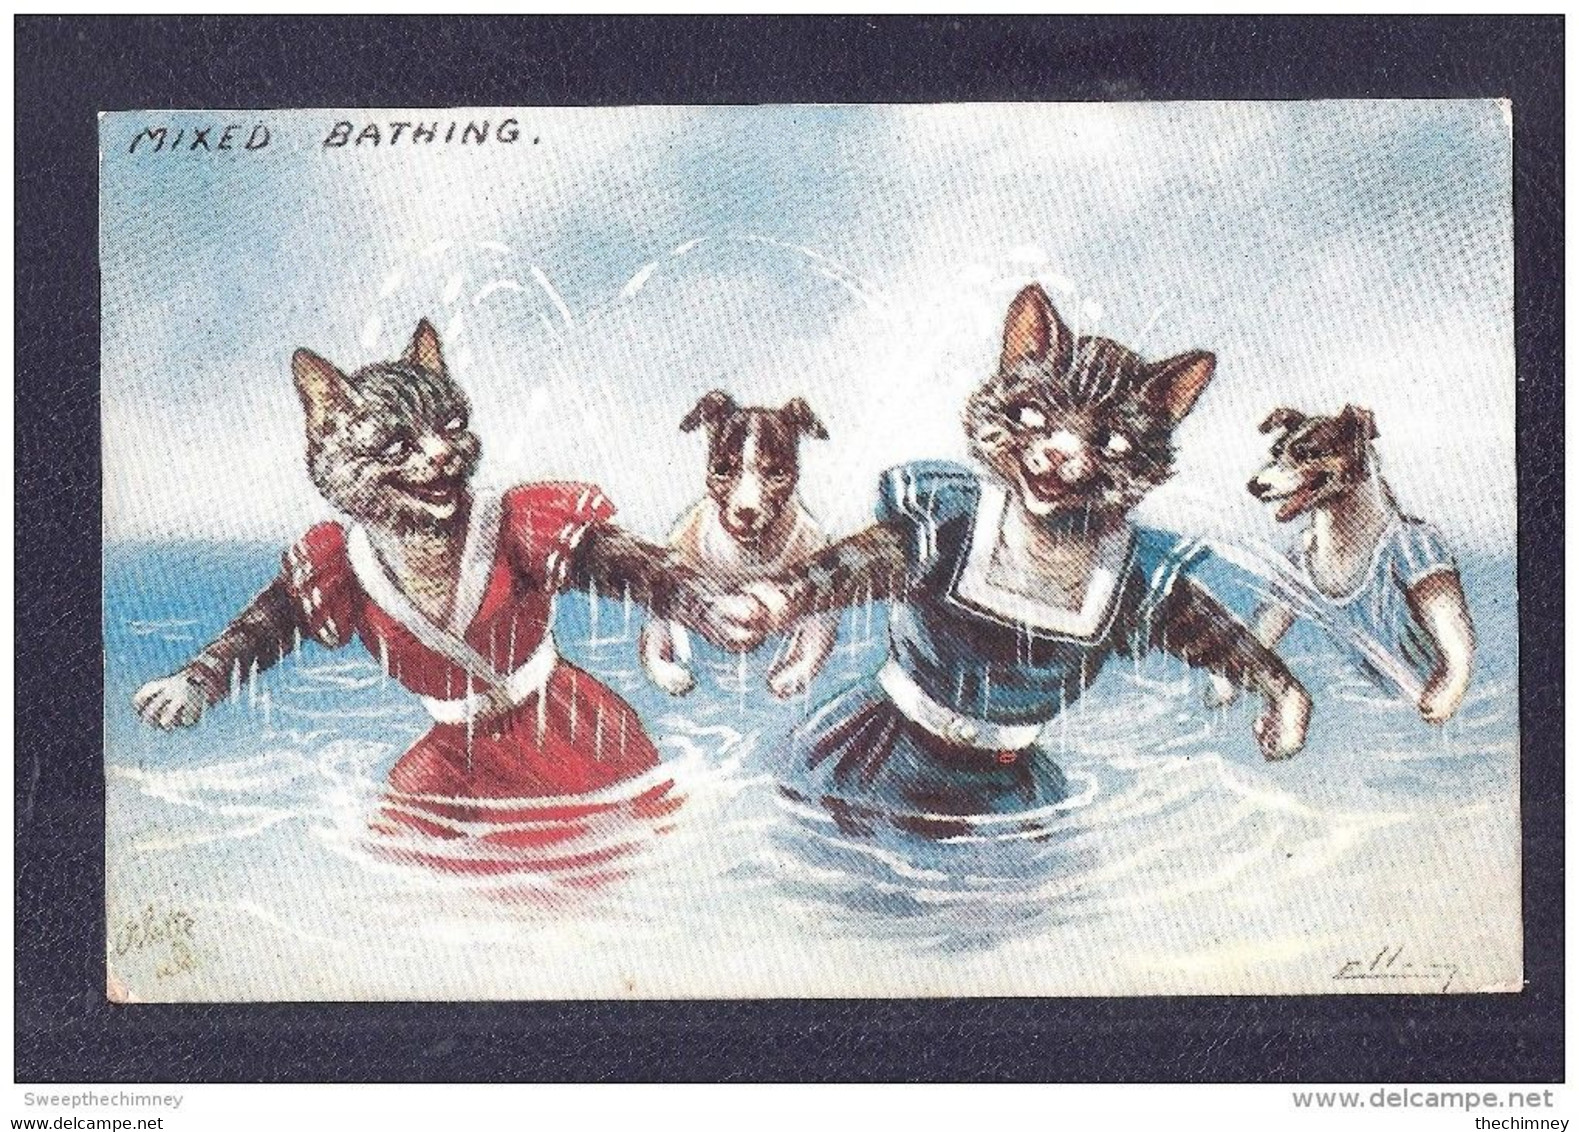 Chat CAT CATS  A La Mer, Mixed Bathing, Illustrateur Ellam, Raphael Tuck, Oilette USED 1909 + STAMP TIMBRE - Chats